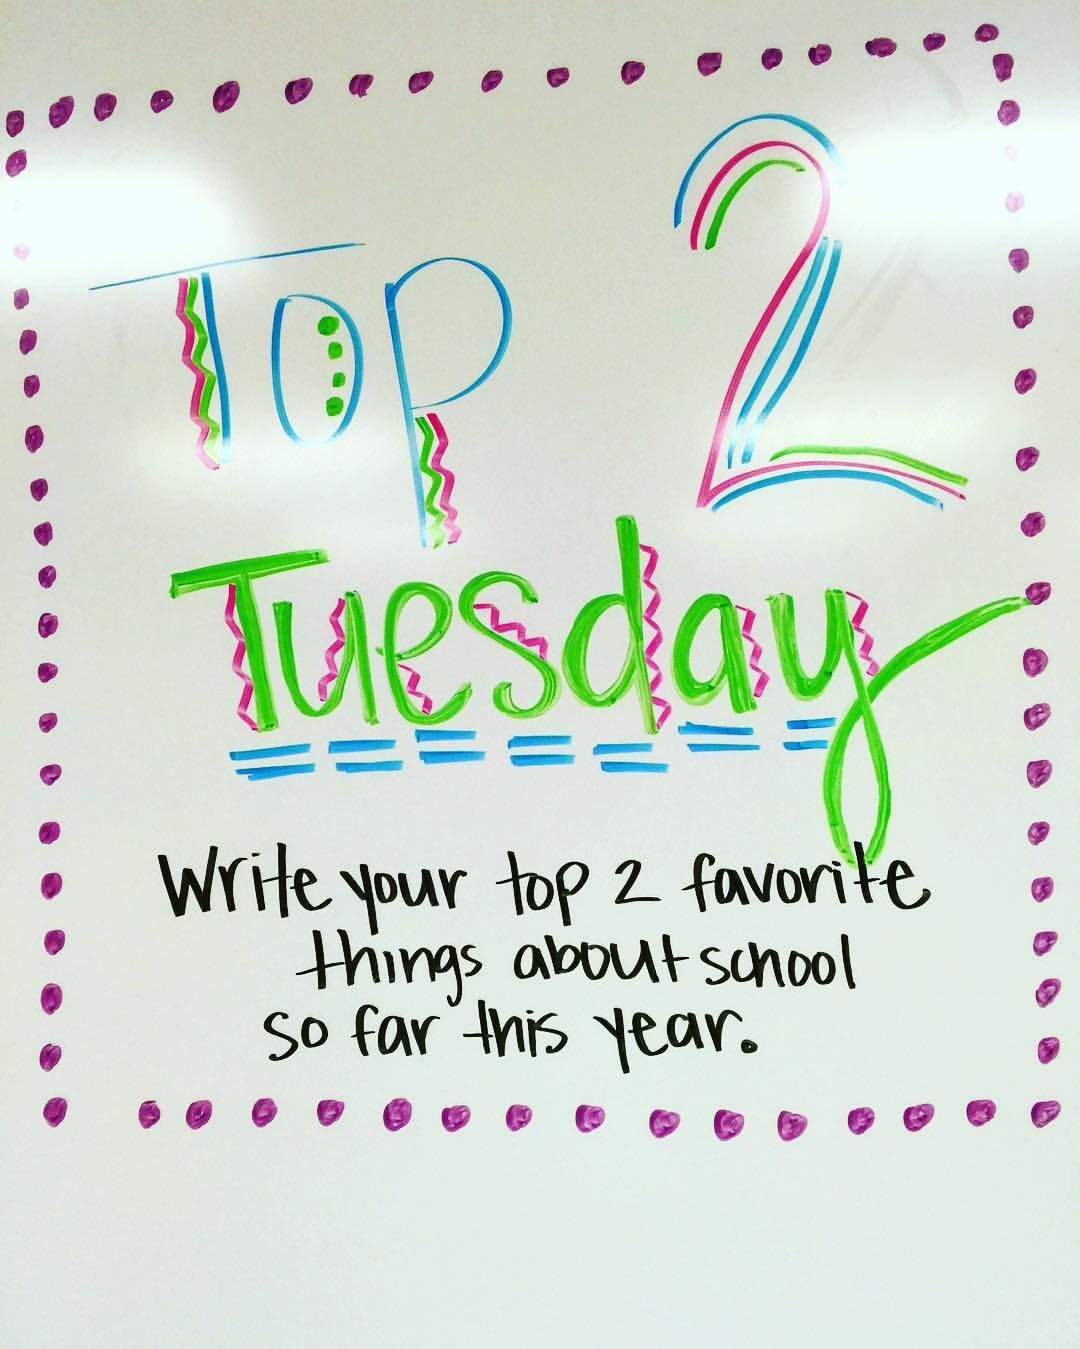 Ciarra Criddle on Instagram: “I have been lovin’ the whiteboard discussions ? #teachersfollowteachers #teachersofinstagram #whiteboardfun #miss5thswhiteboard”